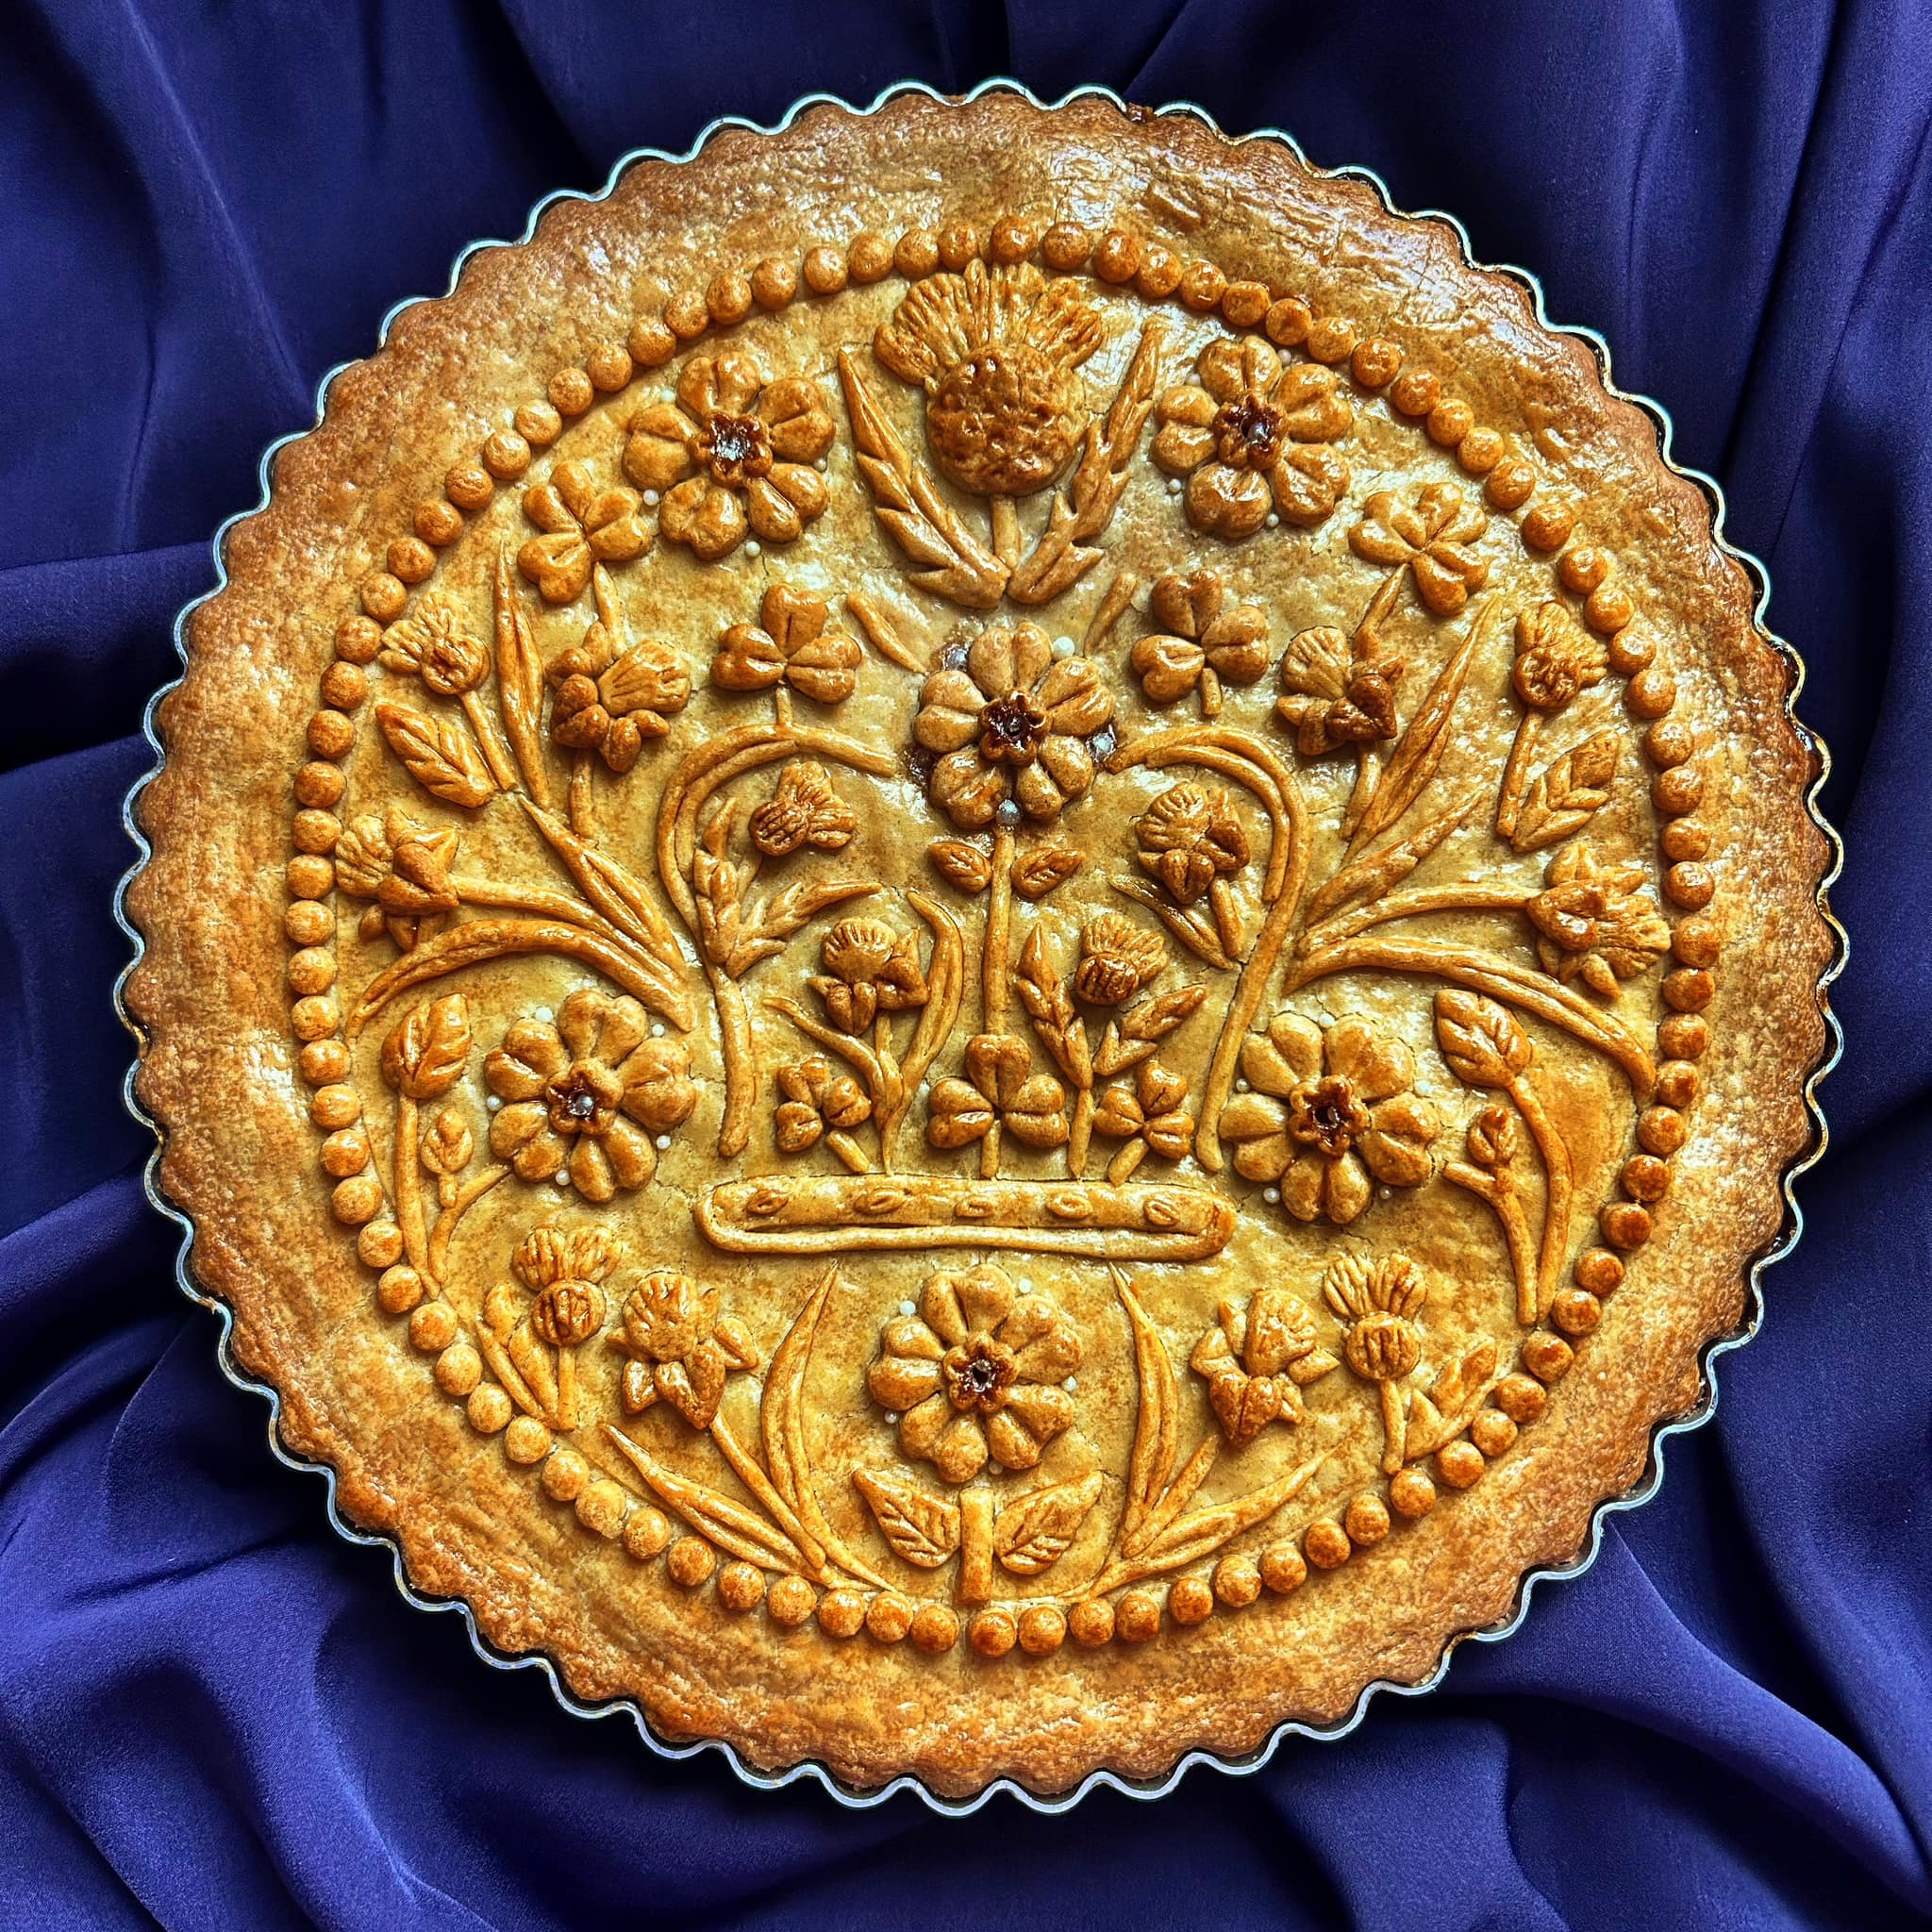 A pie Julie created in honour of the King's Coronation